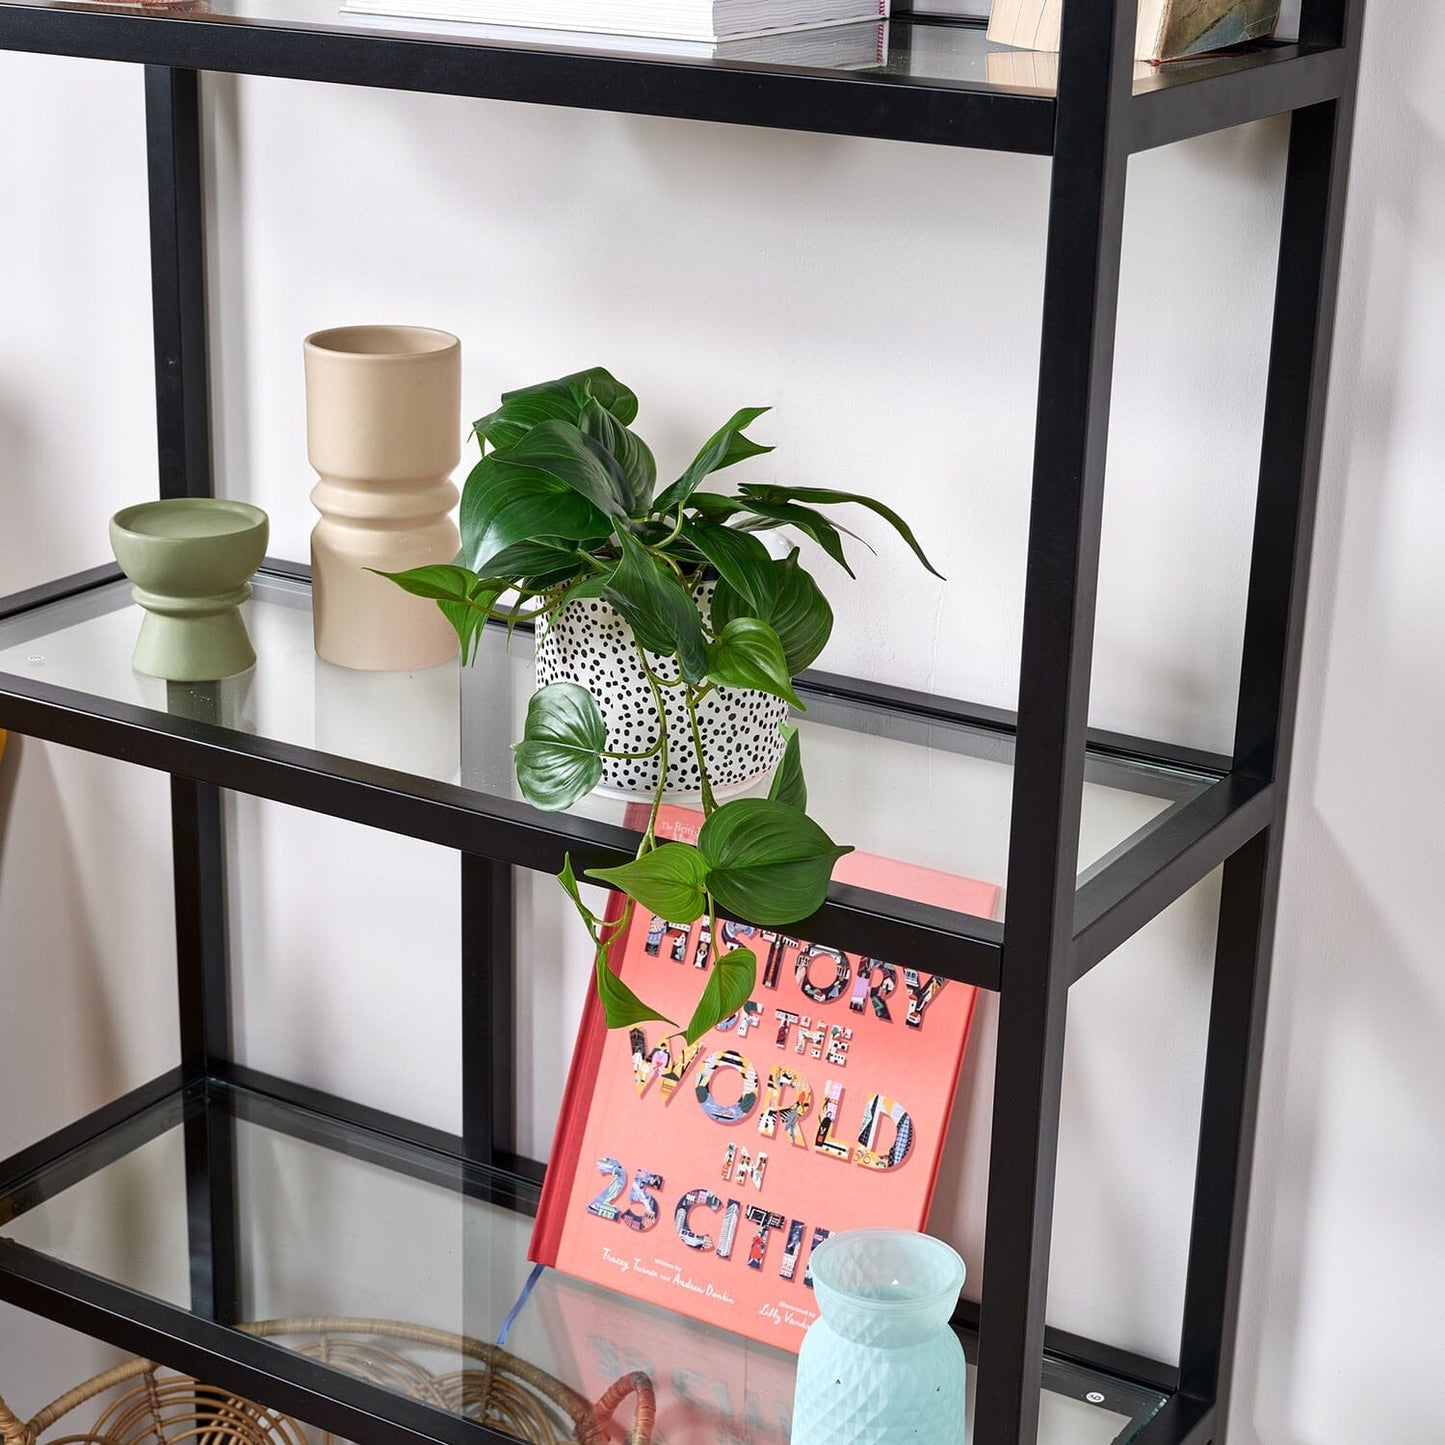 Harris Metal and Glass Bookcase - Laura James